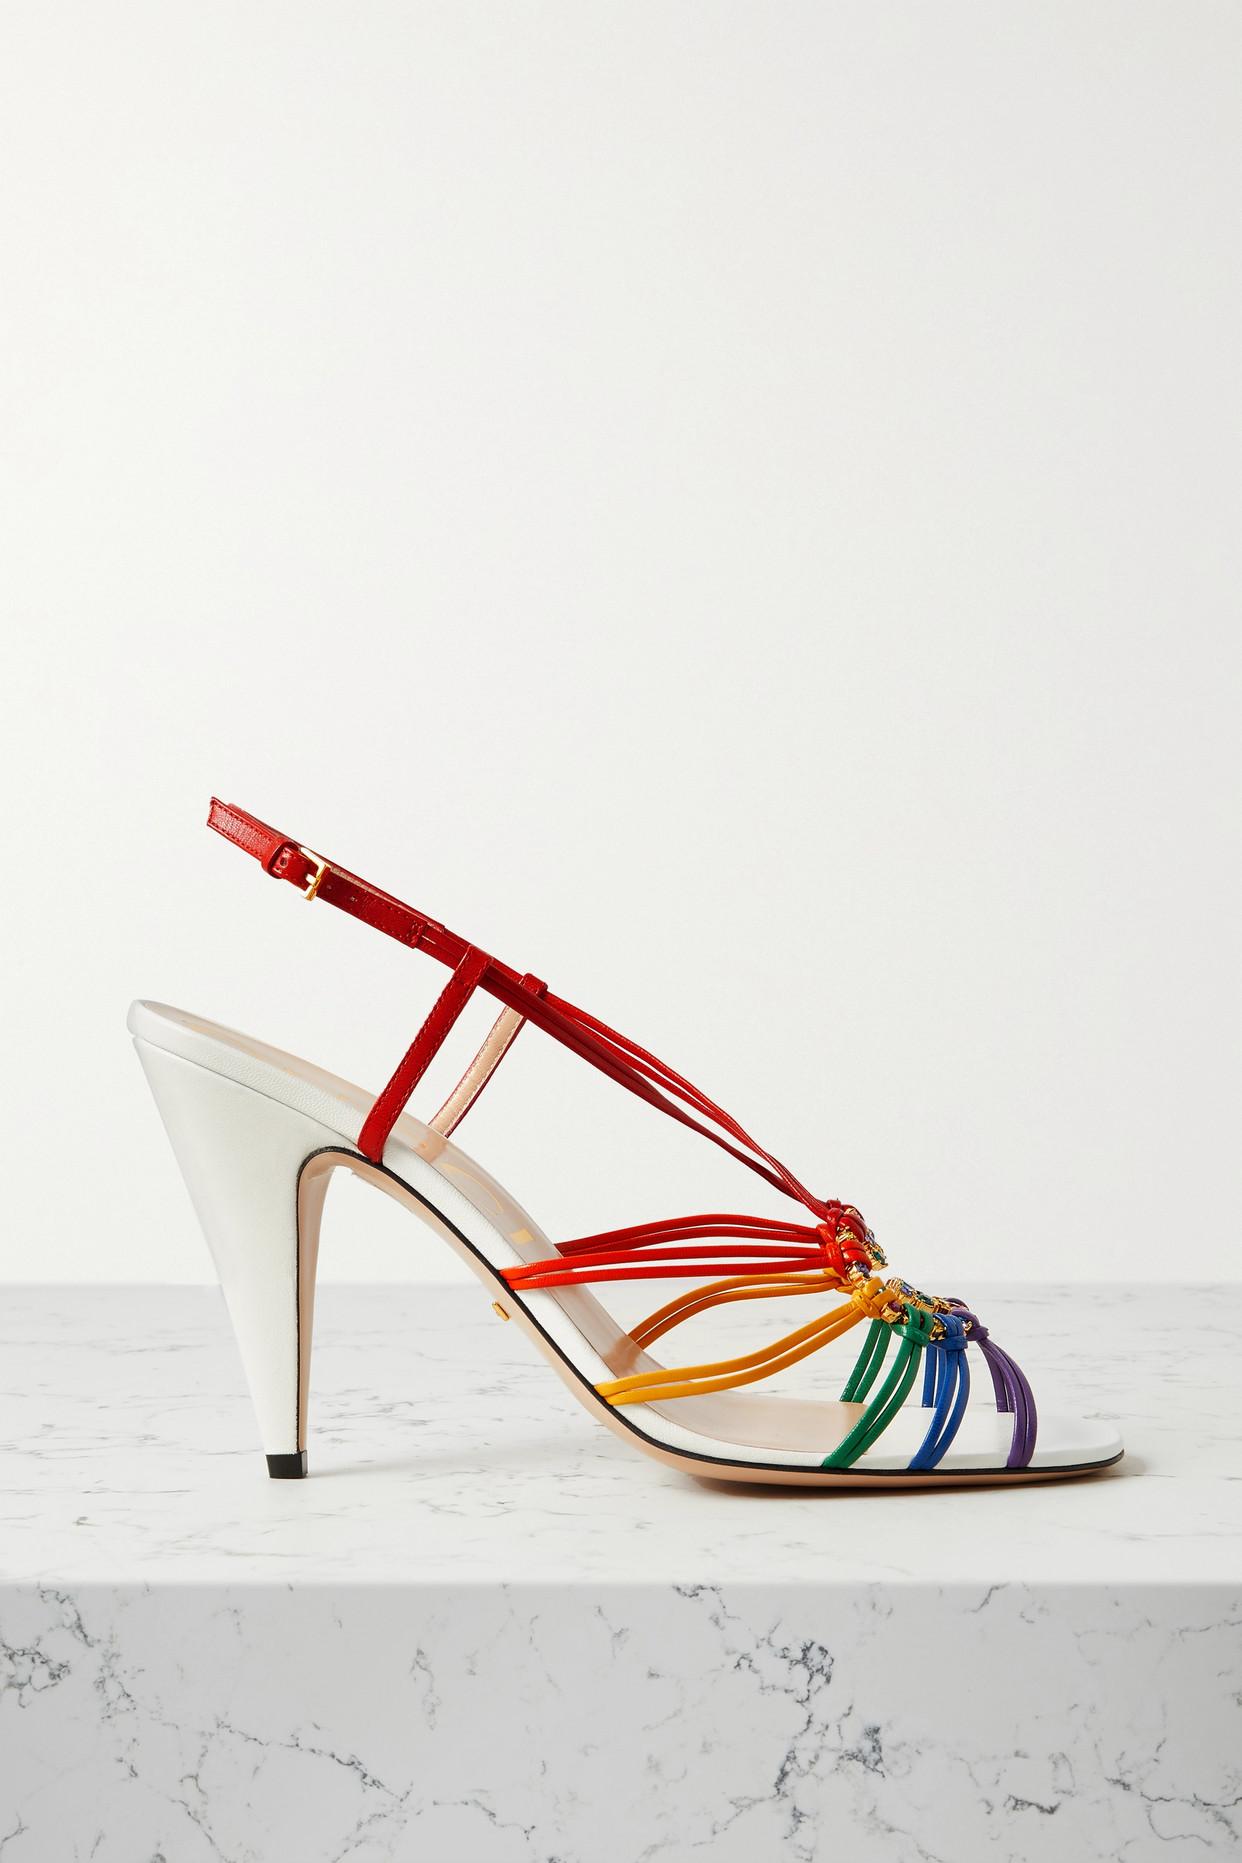 Gucci Isa Crystal-embellished Leather Slingback Sandals in Red | Lyst